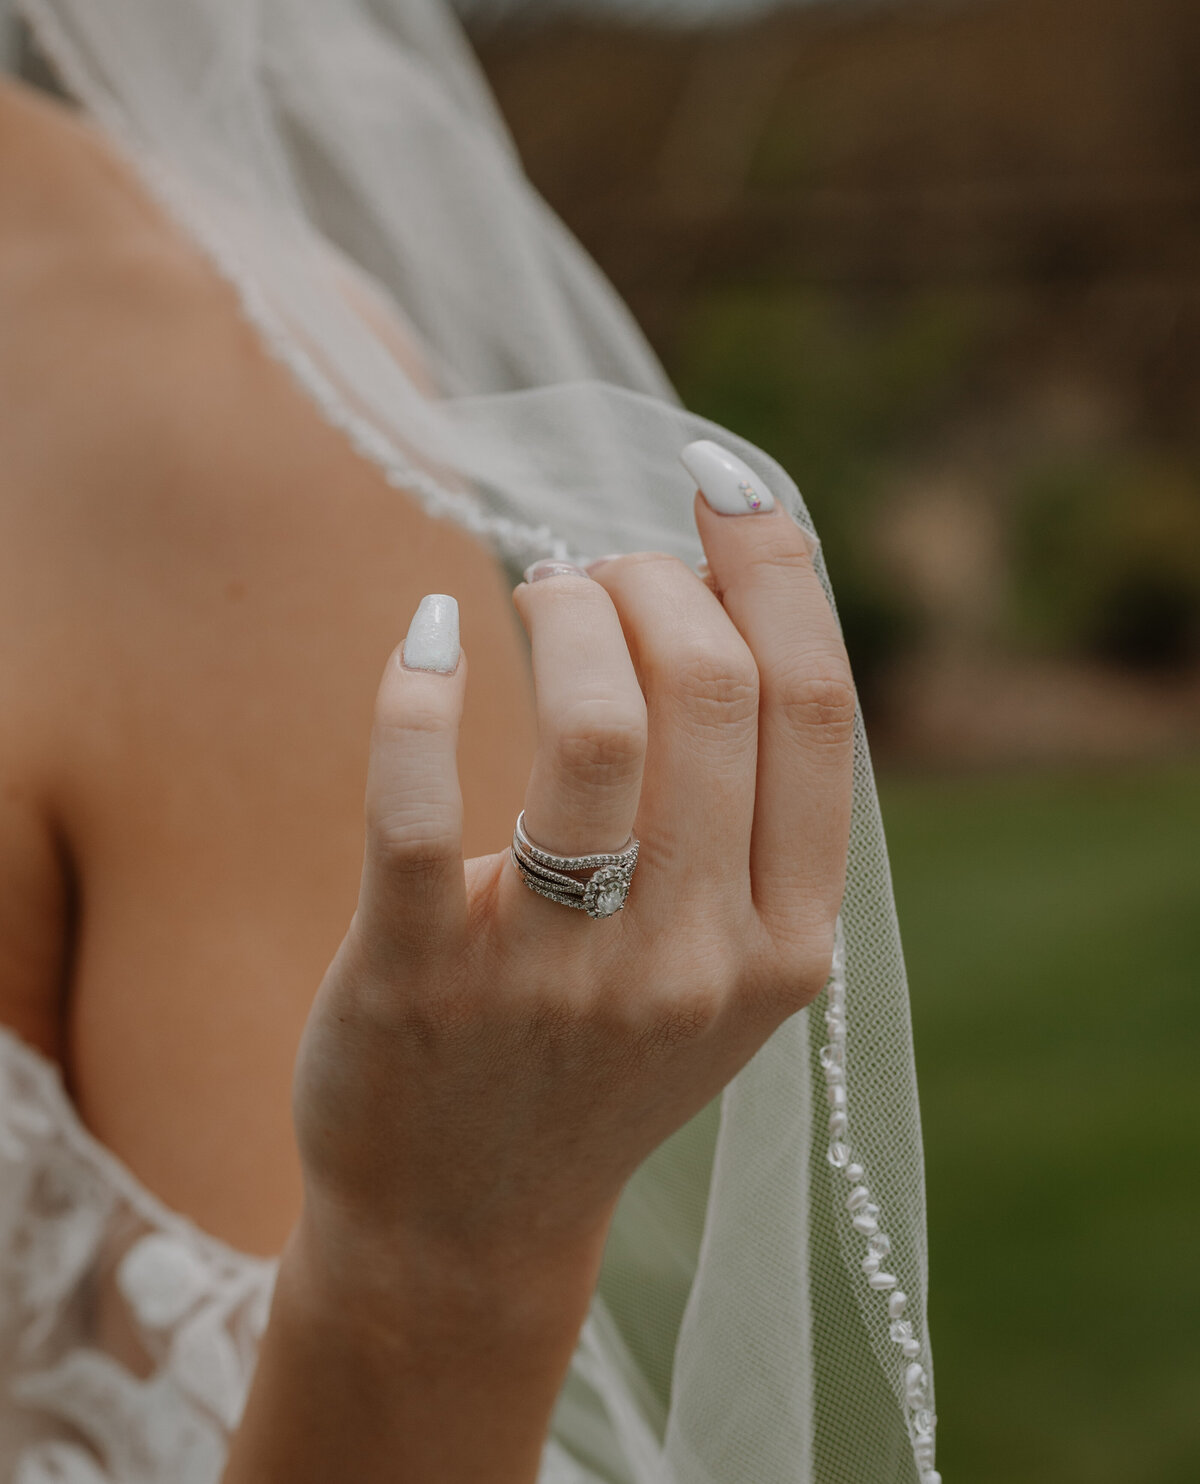 Bride holding veil with wedding ring